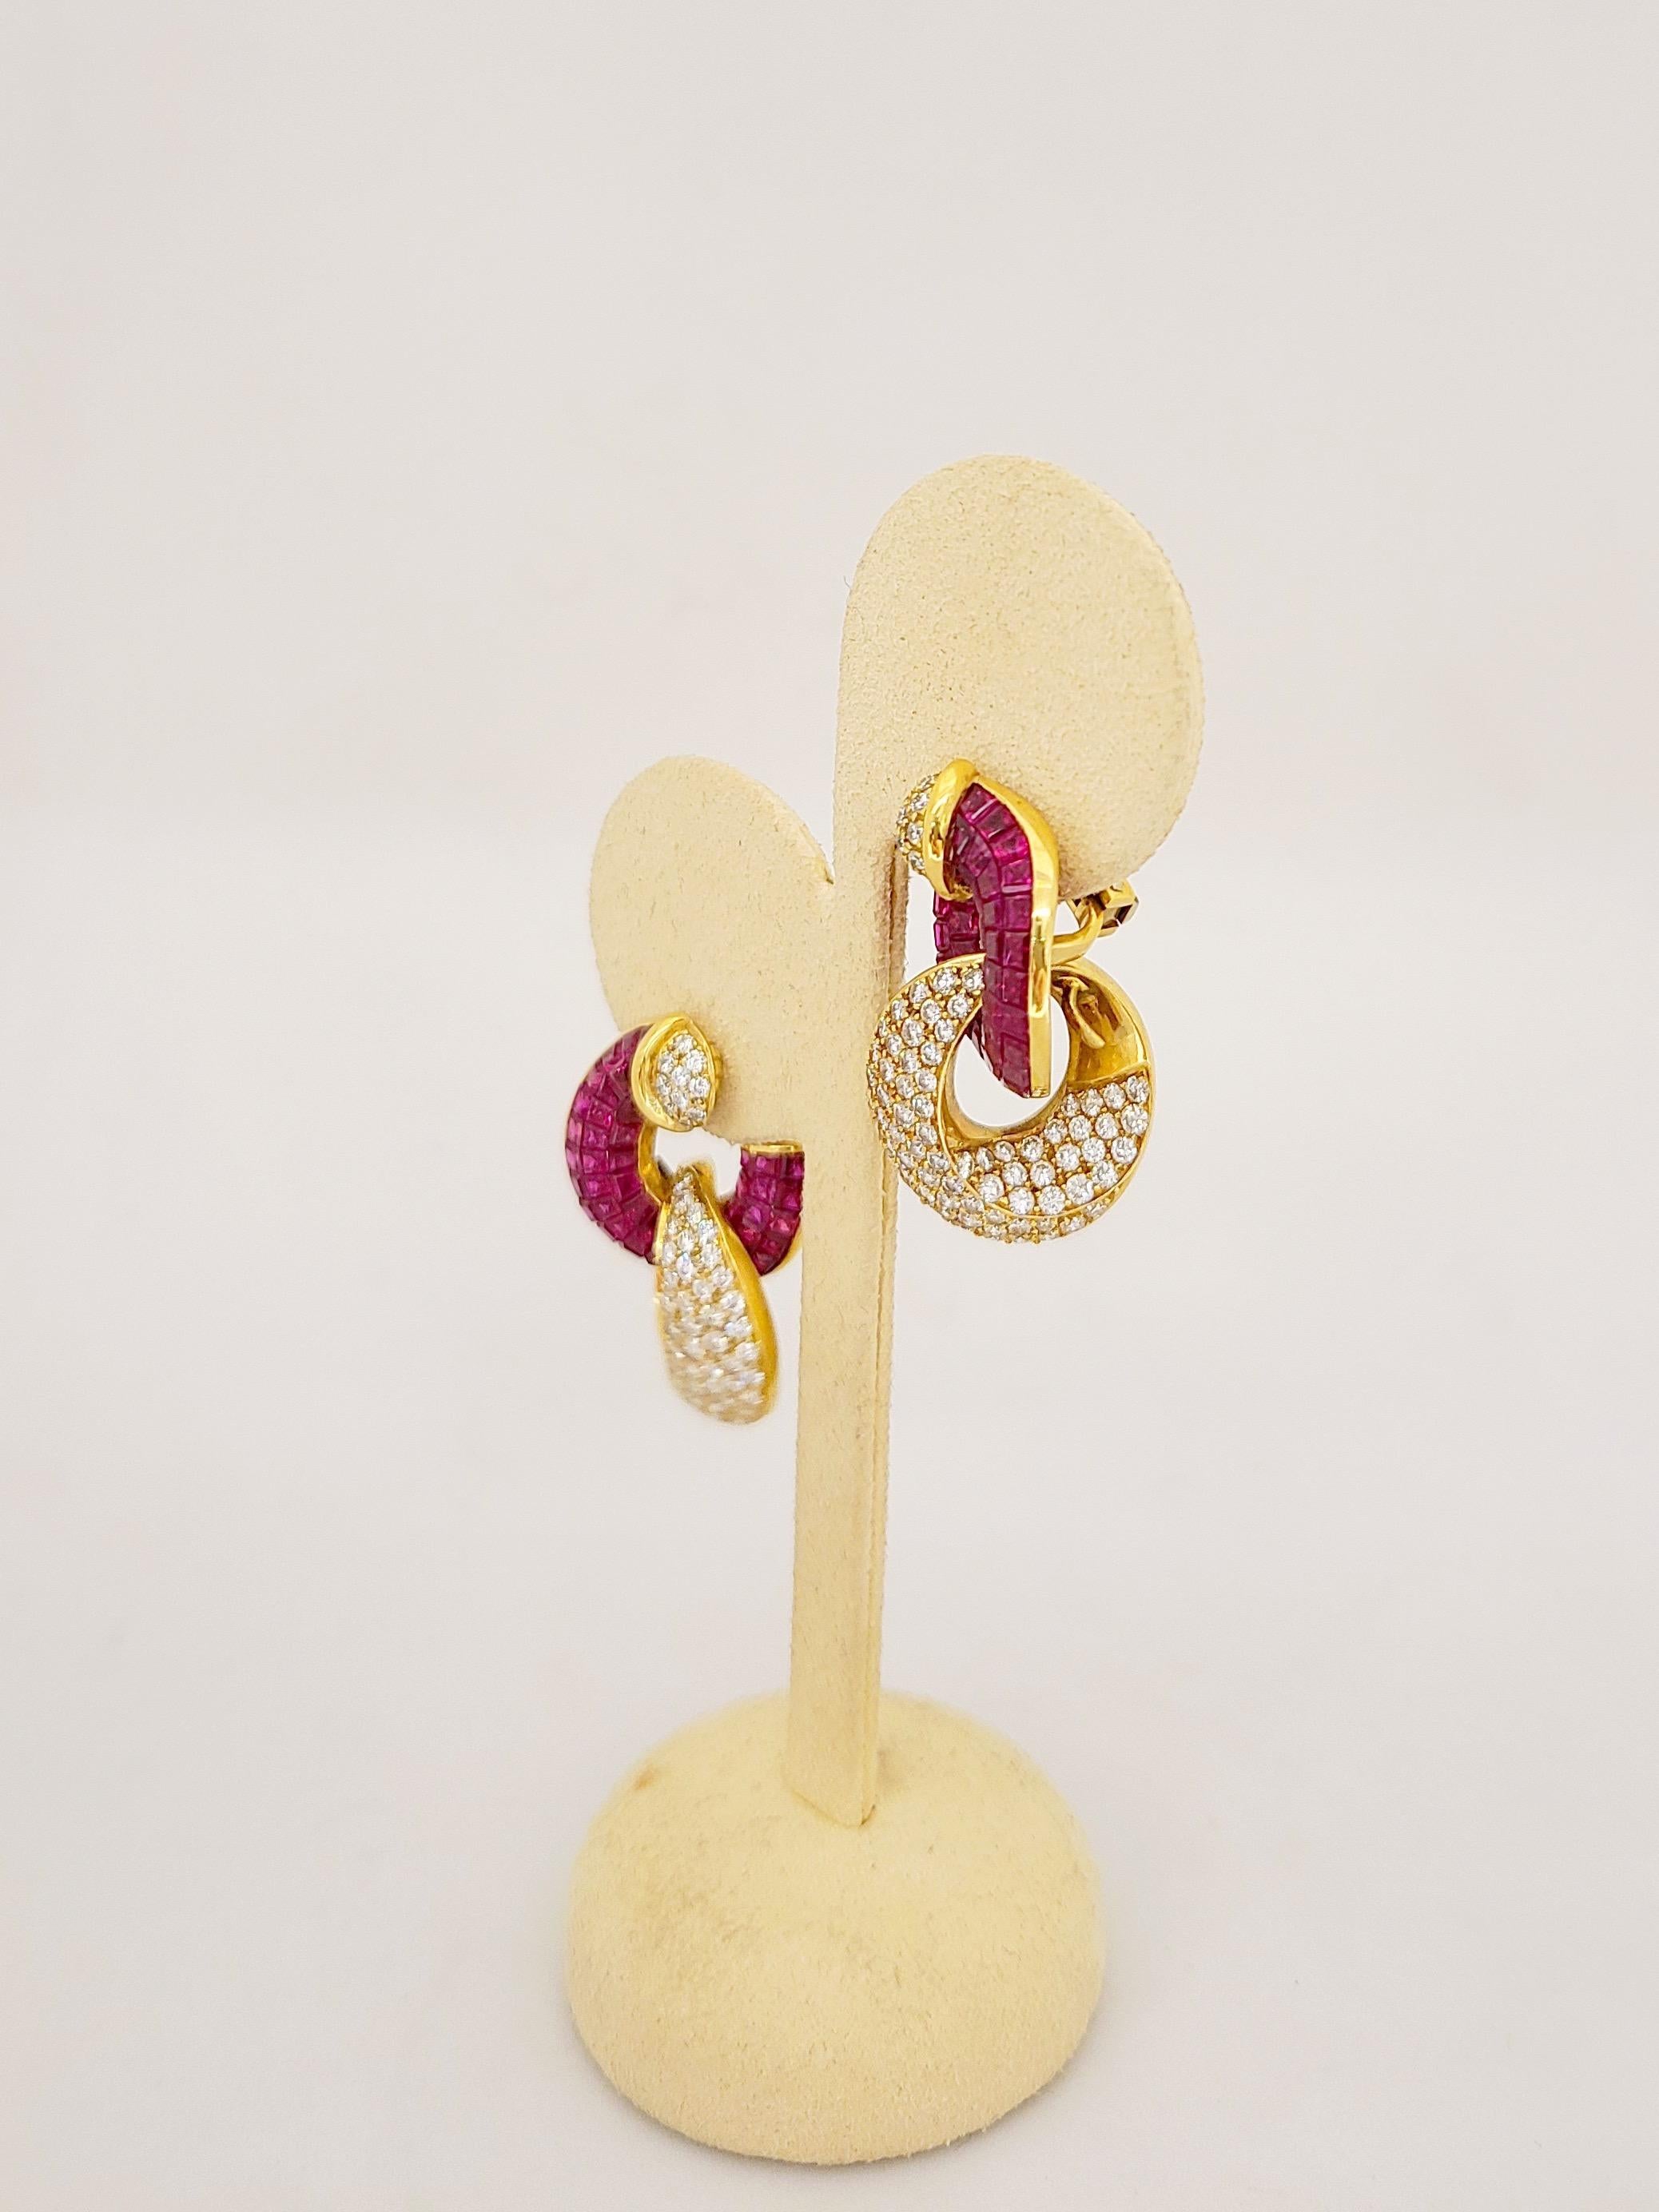 18KT. Yellow Gold, 14.27 Carat Invisibly Set Ruby & 2.96Ct. Diamond Hoop Earring For Sale 1